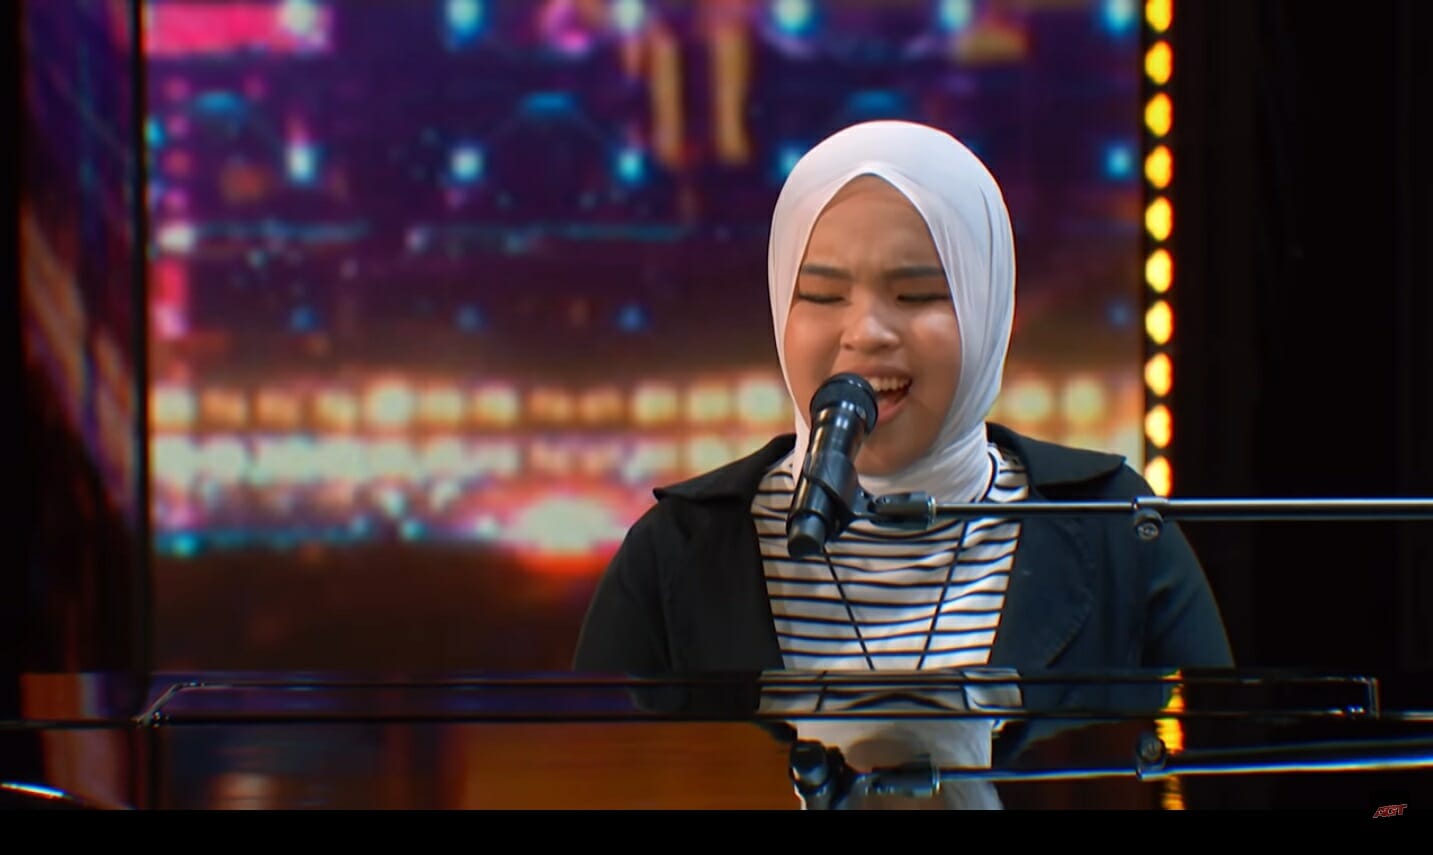 Visually Impaired Putri Ariani Stuns Judges And Gets 'Golden Buzzer' In America's Got Talent